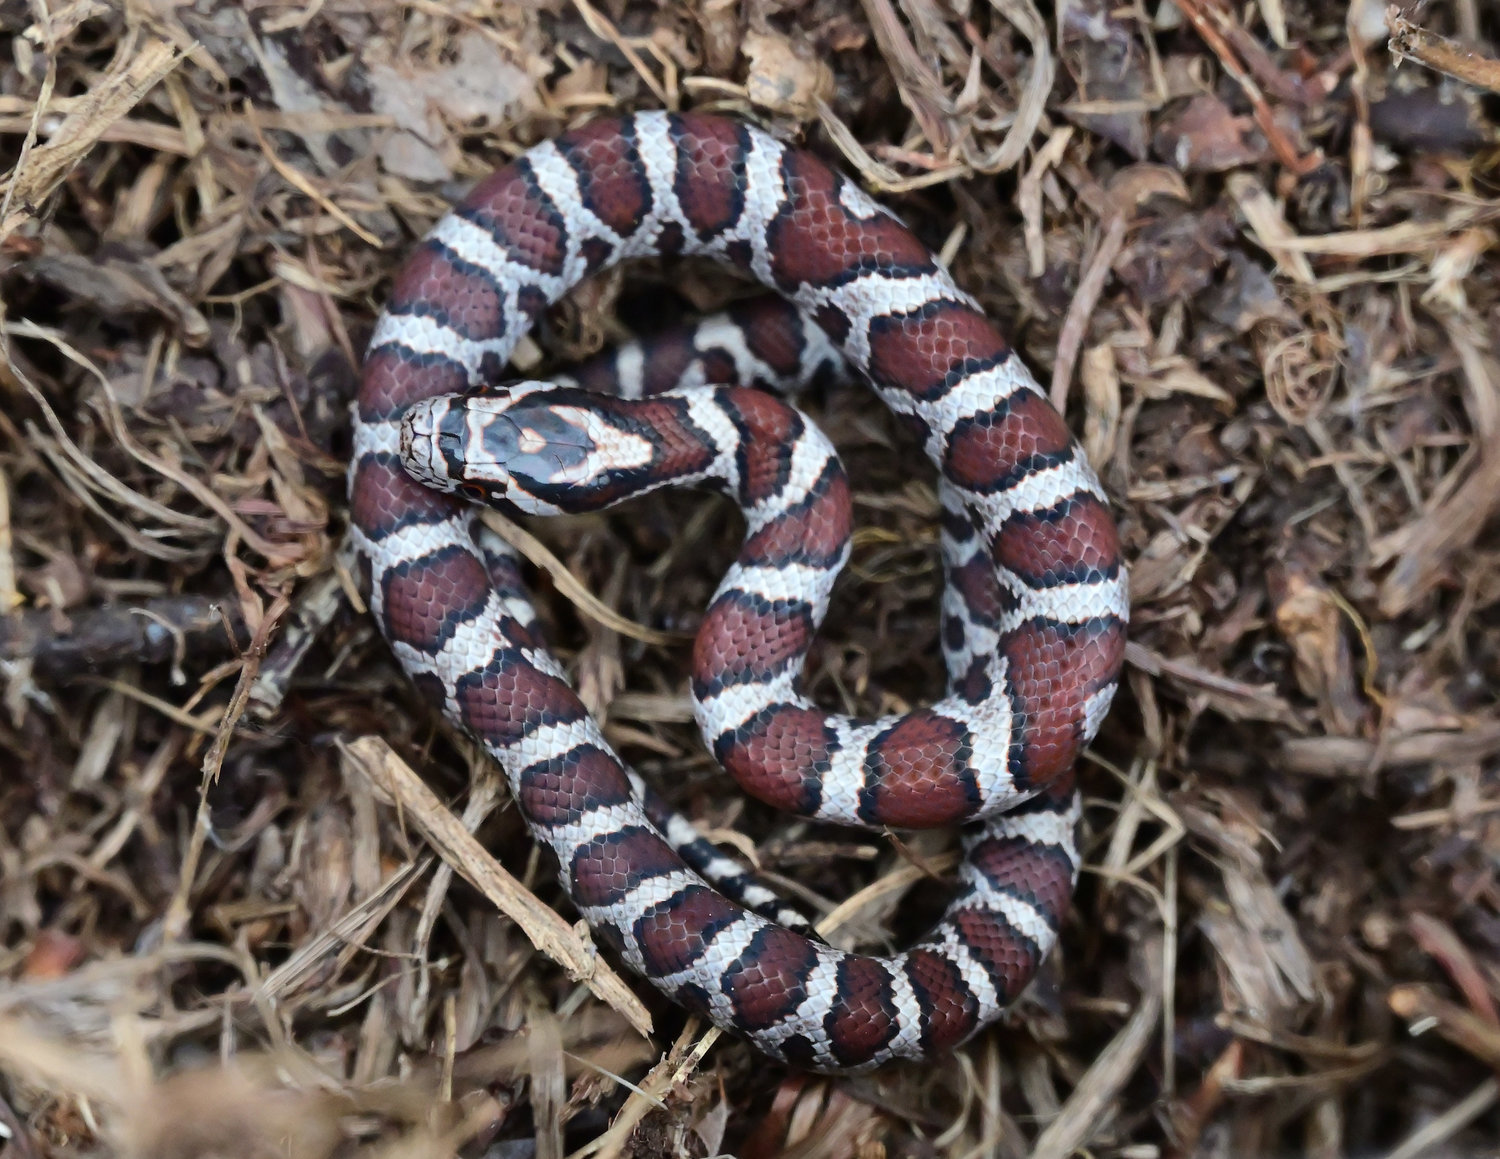 Eastern milksnakes are banded with orange, black and yellow. Because of this, they can be confused with other species (young ones are mistaken for copperheads, last seen in Pike County around 2000). Milksnakes can grow to over four feet and feed on rodents. An old fable stated that milksnakes were able to milk cows, hence its name. (They were likely doing the barn cat’s job and looking for rodents.)